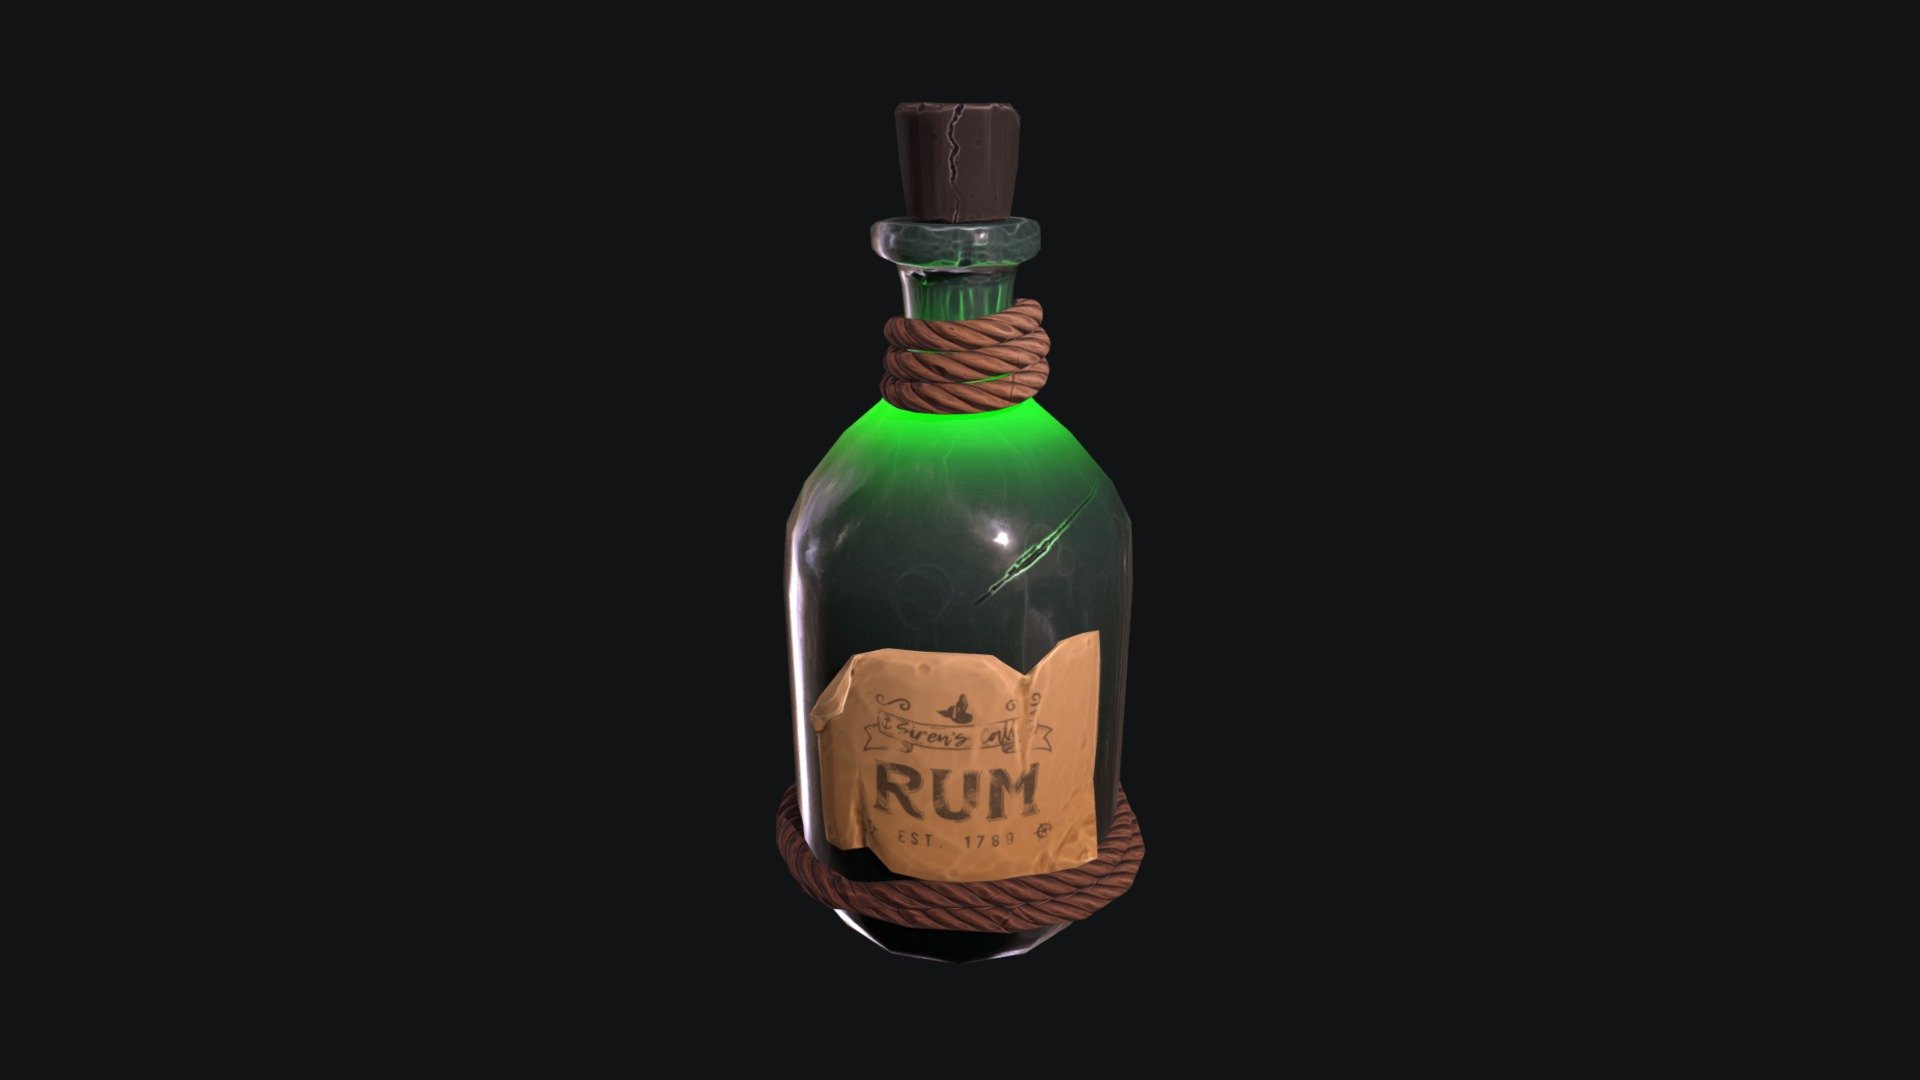 This is Sea Of Thieves fan art.
Inspired by this game, I created a stylized pirate bottle of rum.
I have used Blender, Zbrush and Substance Painter 3d model